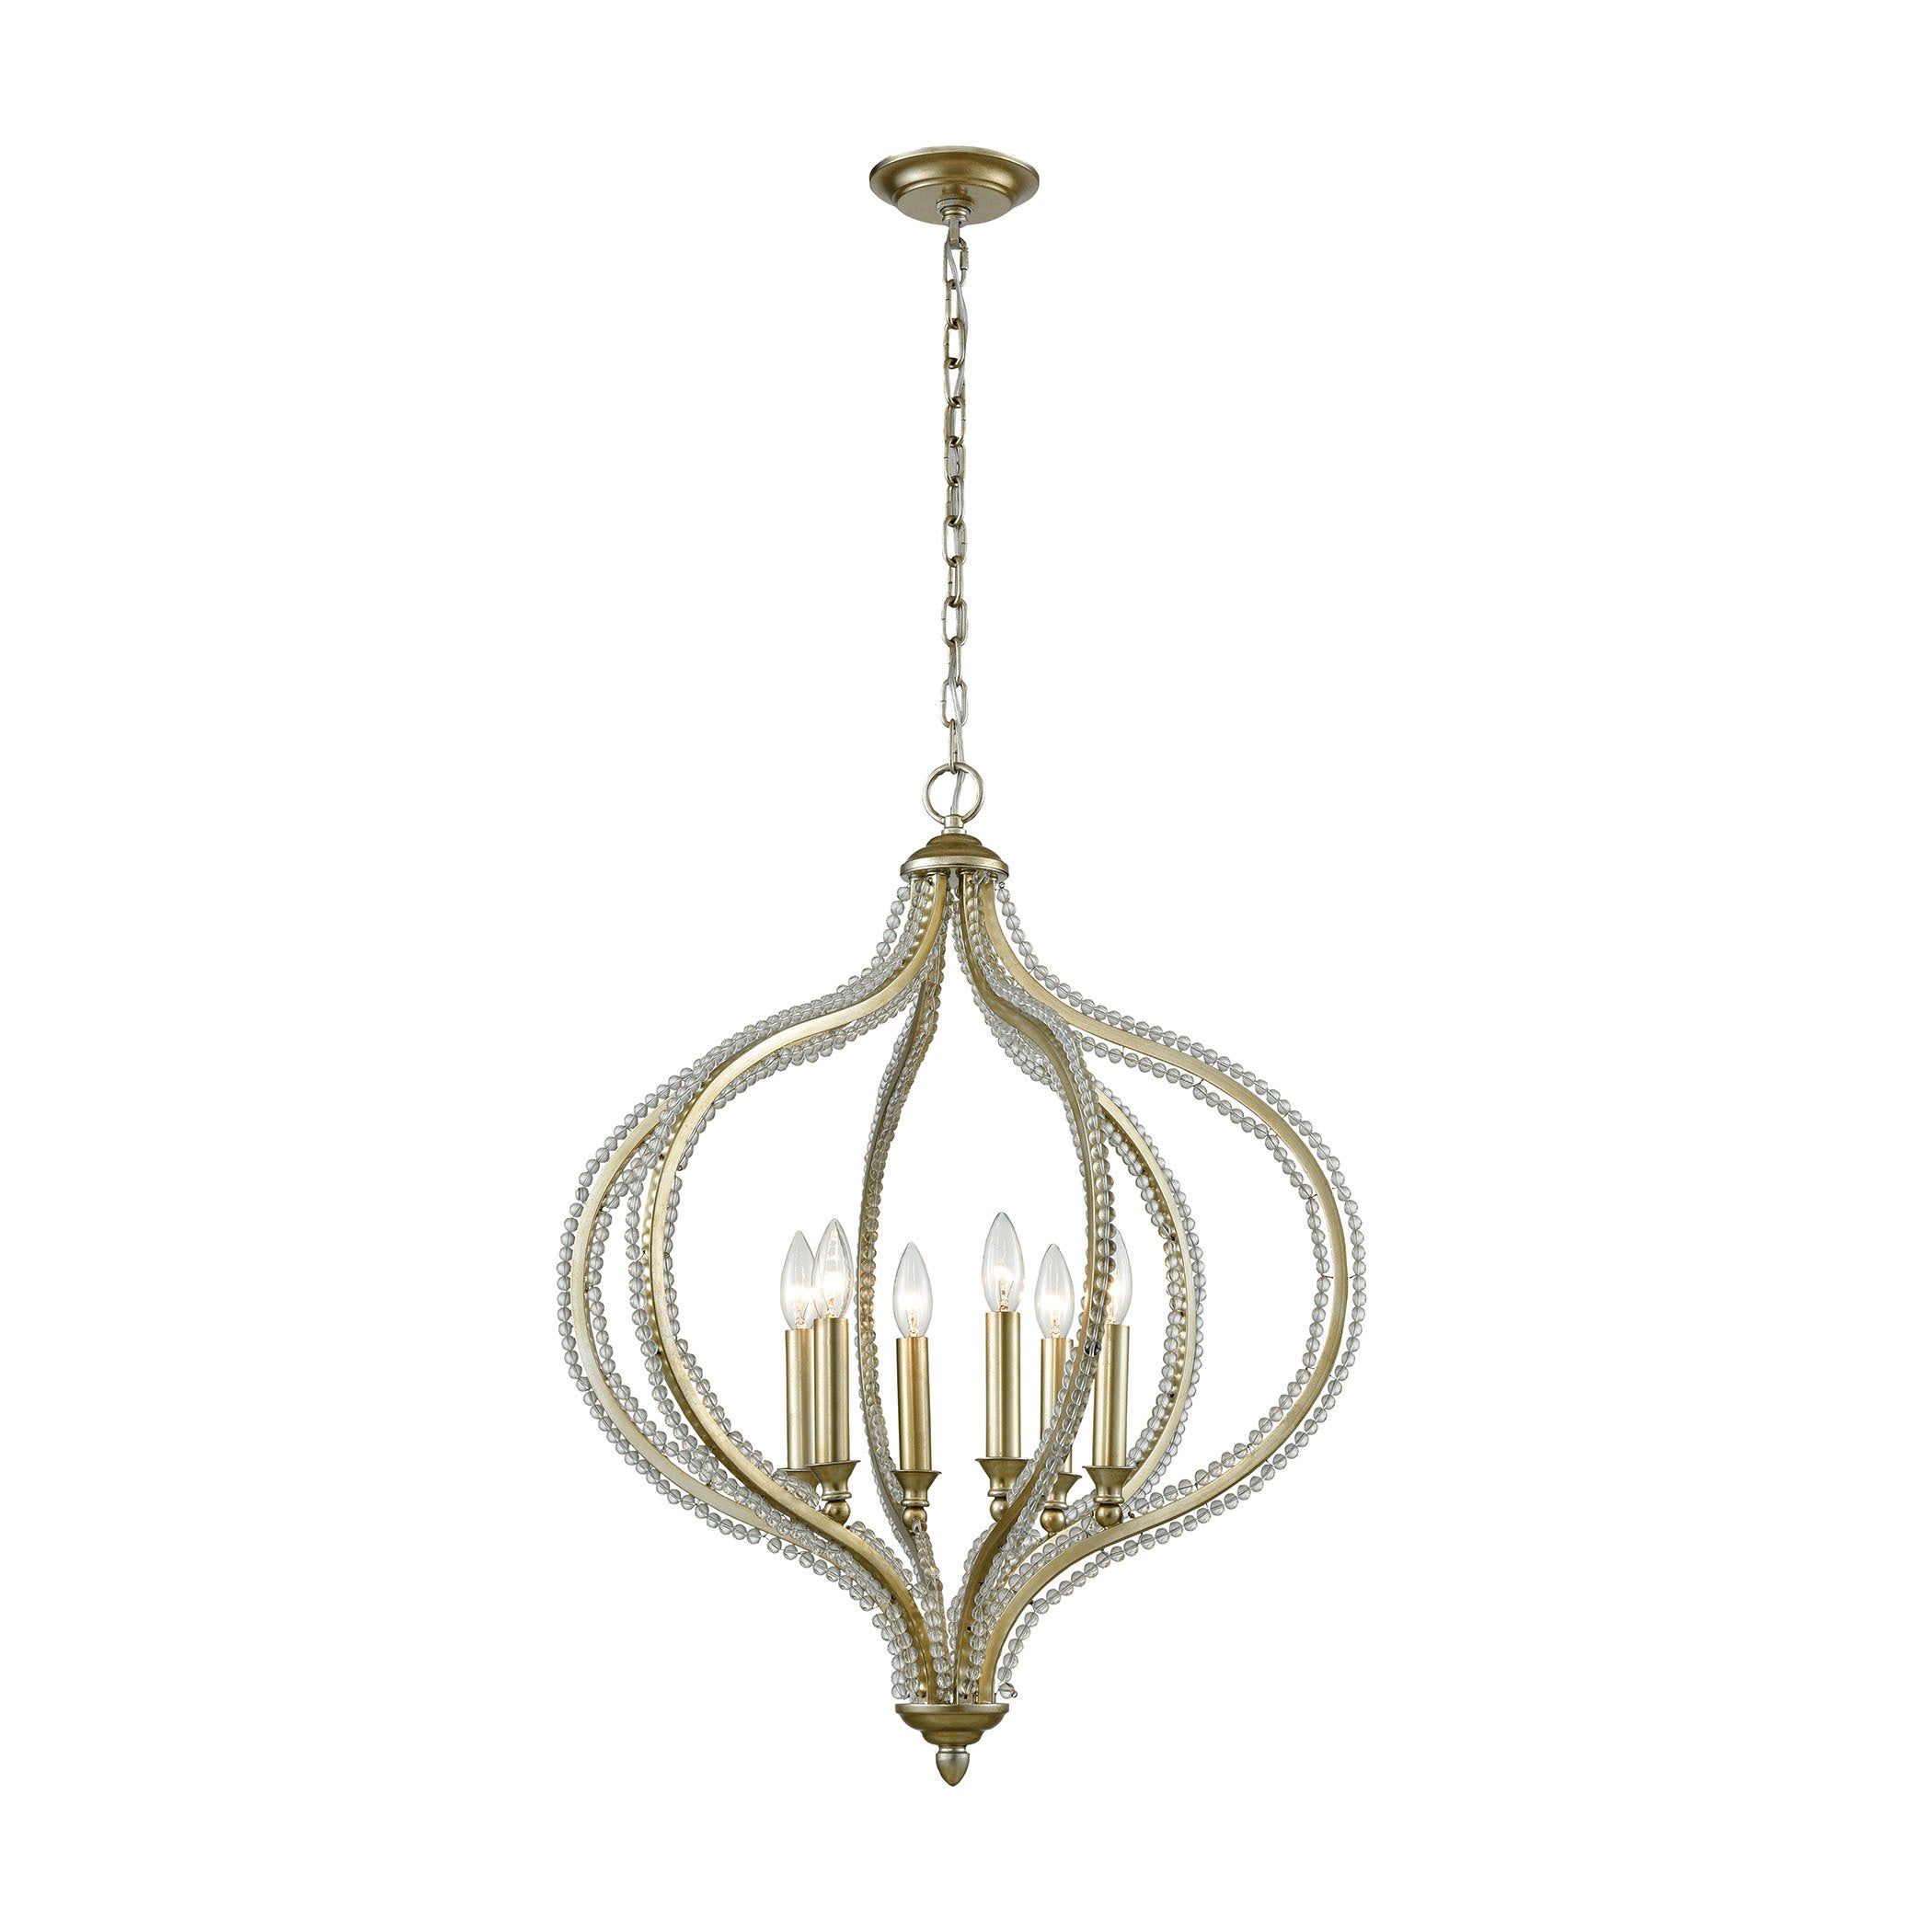 Bennington 6 Light Pendant, Aged Silver Intended For Bennington 4 Light Candle Style Chandeliers (View 25 of 30)